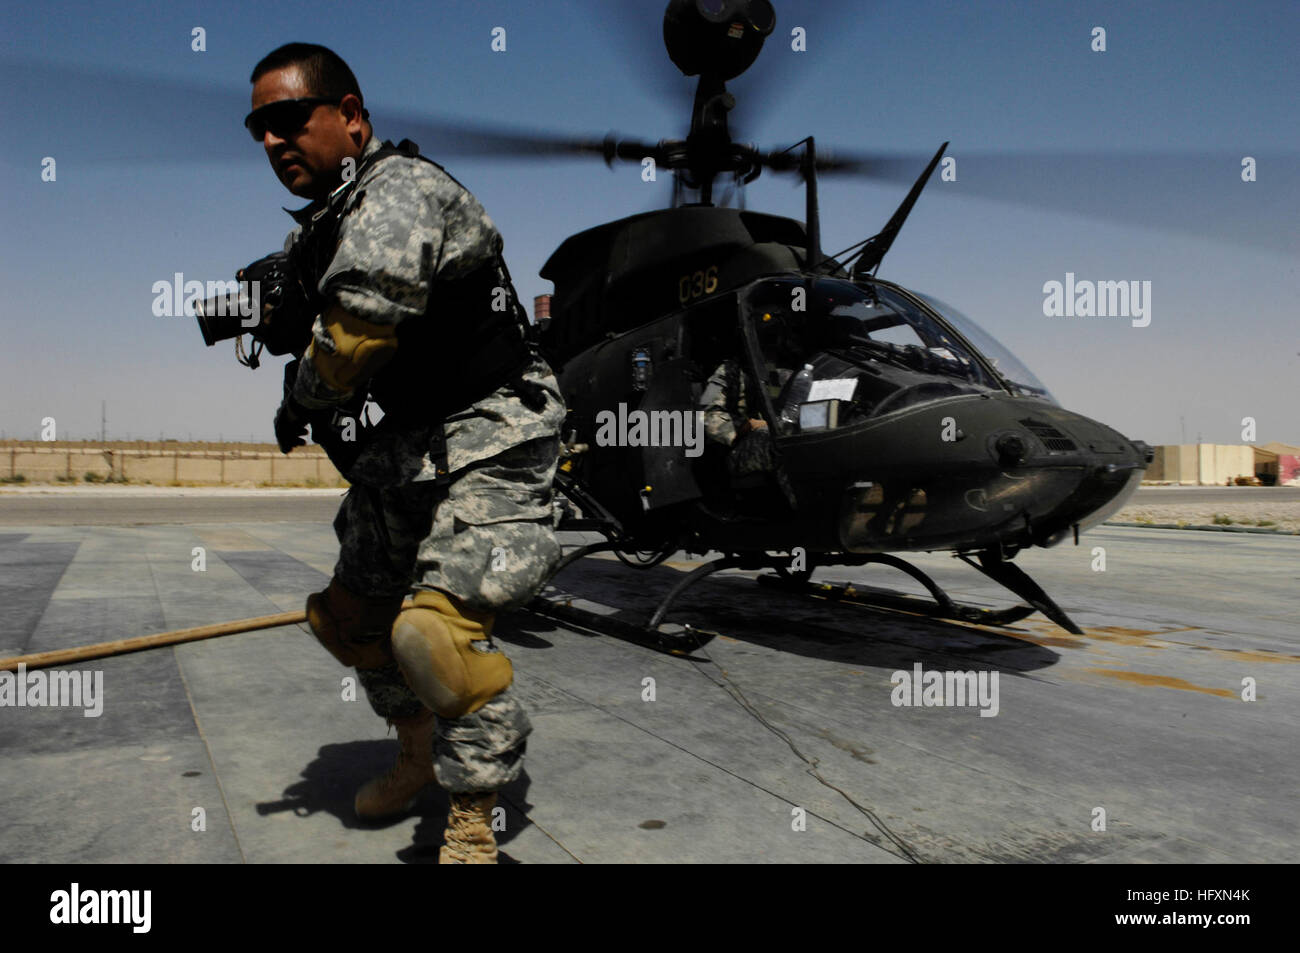 090717-F-7478C-012 MOSUL, Iraq (July 17, 2009) Mass Communication Specialist 1st Class Carmichael Yepez, assigned to Multi-National Corps-Iraq, Joint Combat Camera, moves to clear the helicopter pad after capturing video and photo of a UH-58 Delta helicopter refueling and reloading munitions at Forward Operating Base Diamondback, near Mosul, Iraq.  (U.S. Air Force photo by Senior Airman Kamaile Chan/Released) US Navy 090717-F-7478C-012 Mass Communication Specialist 1st Class Carmichael Yepez, assigned to Multi-National Corps-Iraq, Joint Combat Camera, moves to clear the helicopter pad after ca Stock Photo